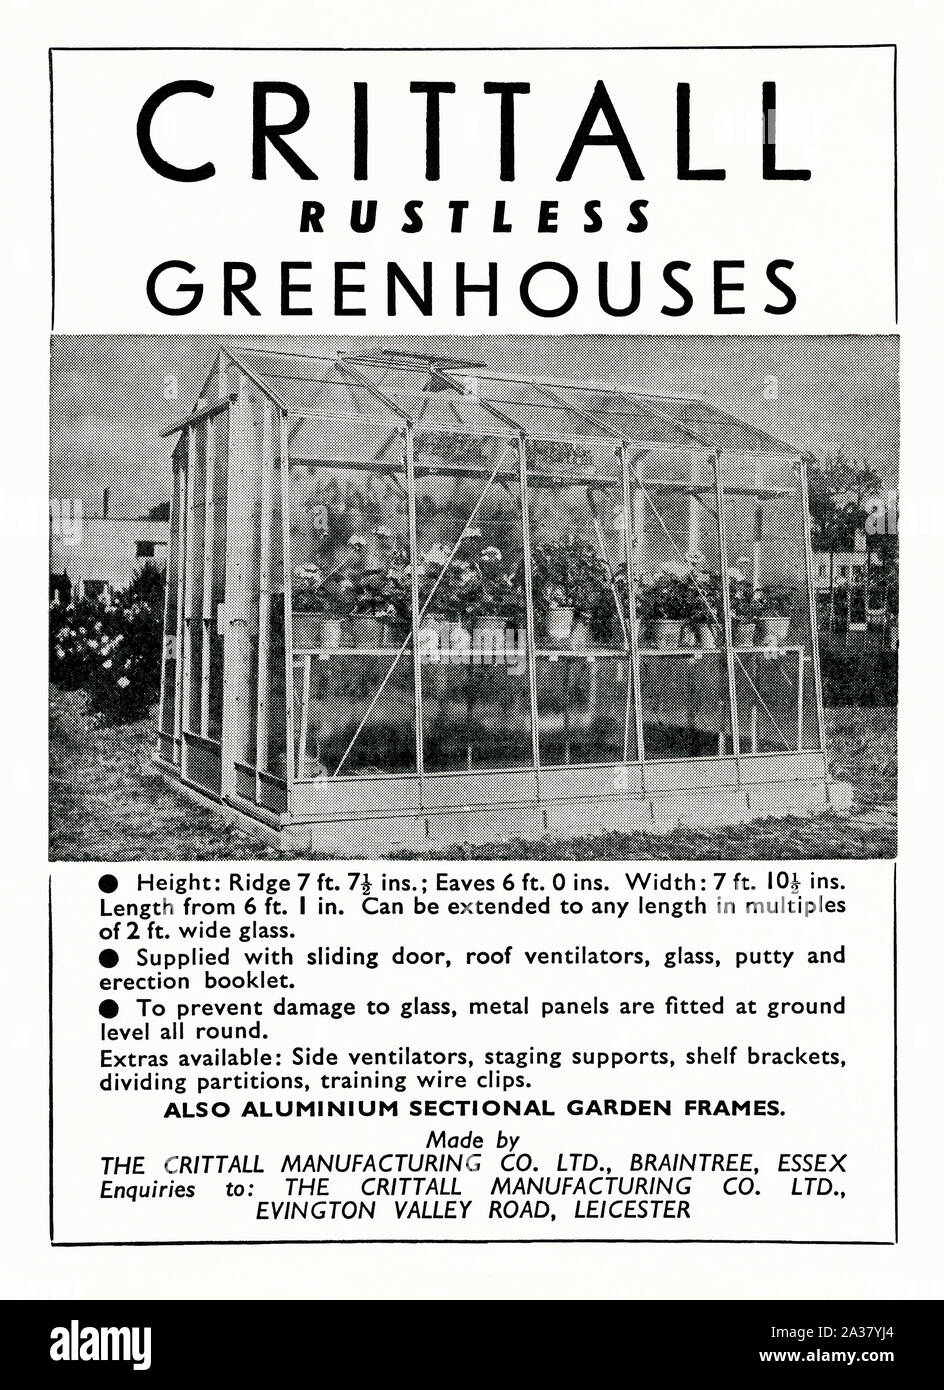 Advert for a Crittall rustless aluminium greenhouse, 1951. Crittall is most famous for its steel-framed windows. Francis Henry Crittall (1860–1935) – began to manufacture metal windows in 1884. Five years later (1889), the Crittall Manufacturing Company Ltd was incorporated. Its products have been used in thousands of buildings across the United Kingdom and beyond. The company is particularly associated with the Art Deco and Modernist movements in 20th-century architecture. Today it is based in Witham, Essex, close to its historic roots in Braintree. Stock Photo